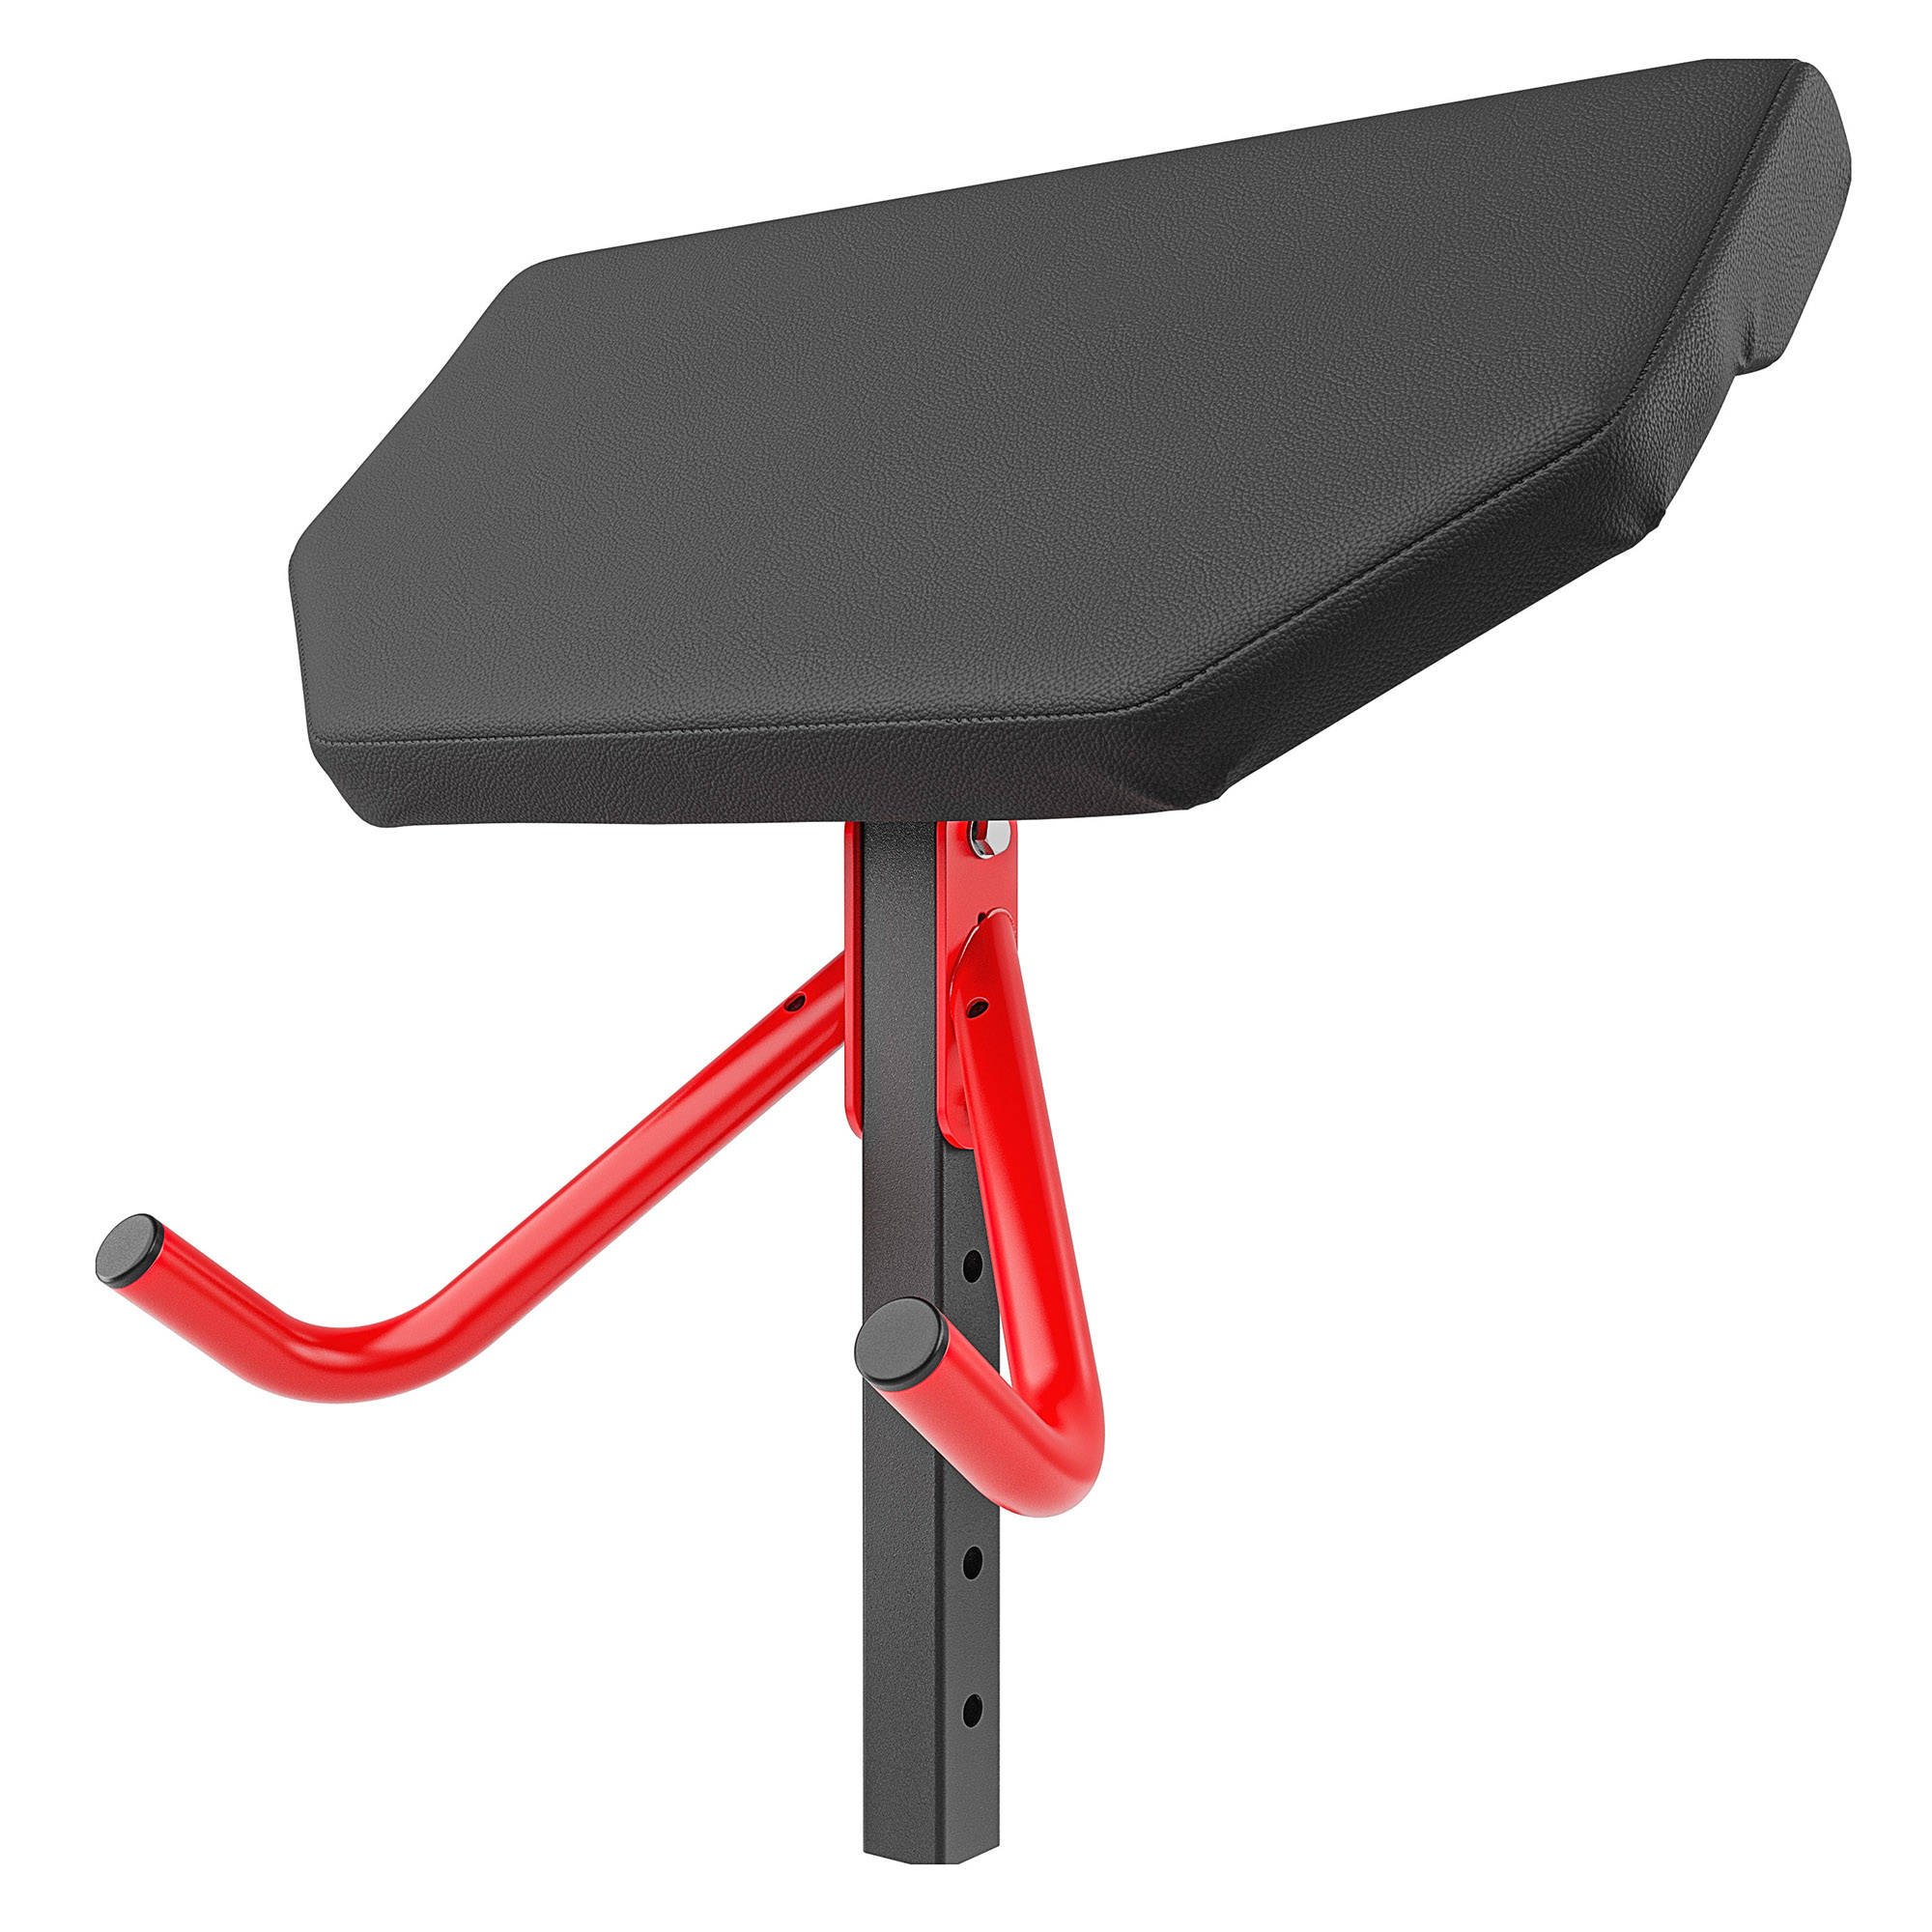 Set MH25_132KG_KIER_G Adjustable bench with adapter Adjustable exercise  racks stands Leg trainer (to the weight bench) Home Preacher curl  attachment Lat attachment reinforced bars and rubberized